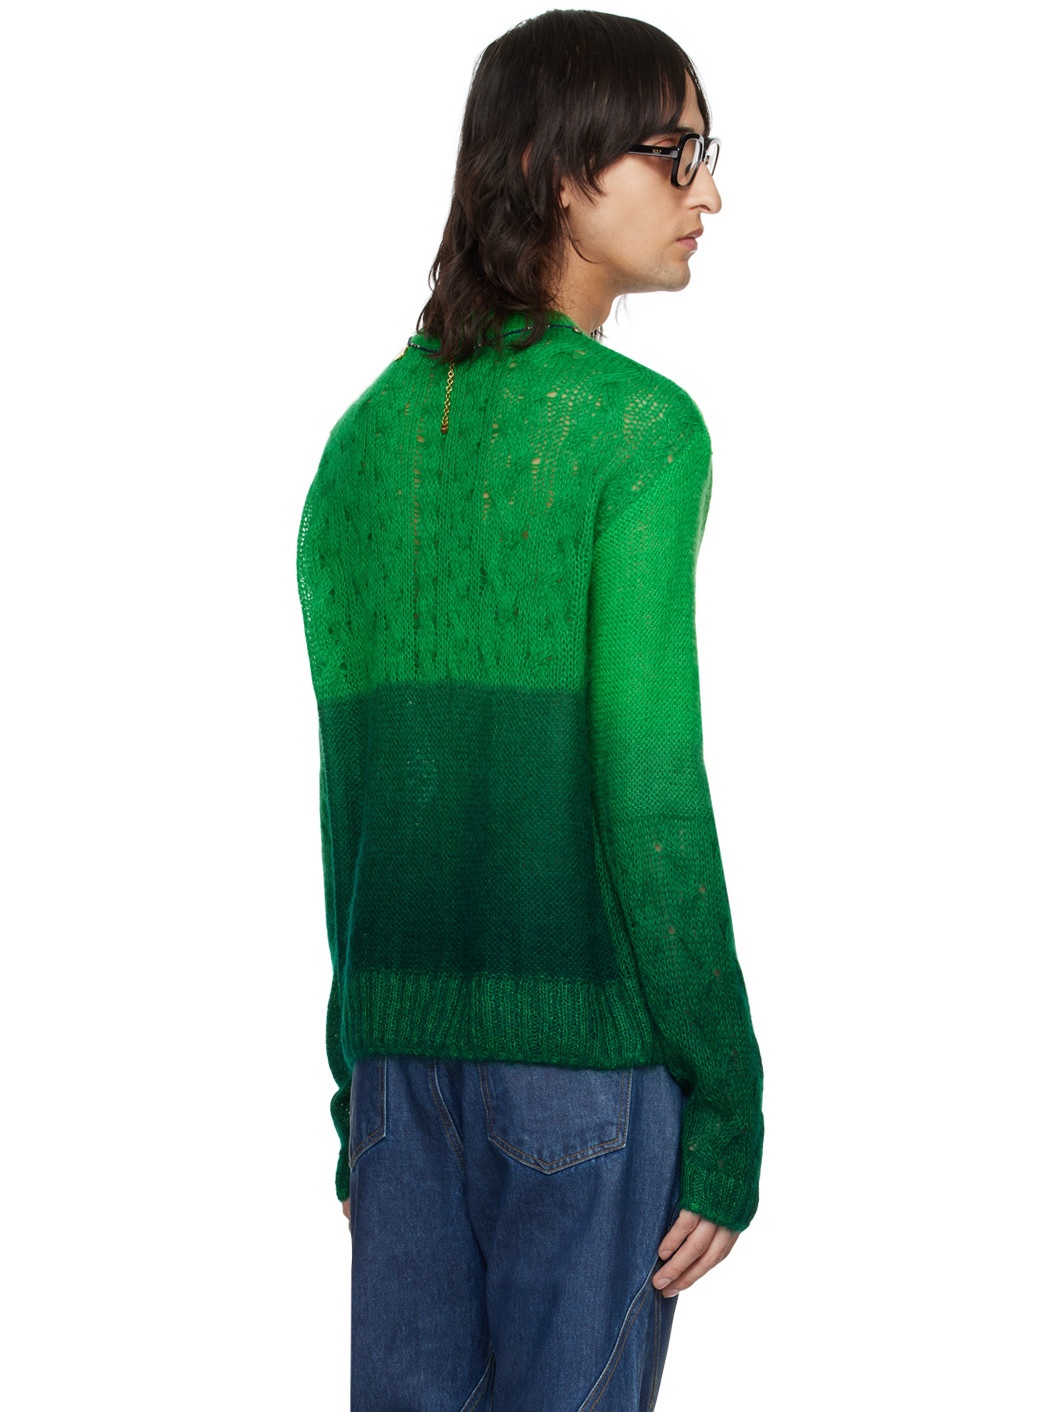 Green Foresk Sweater - 3